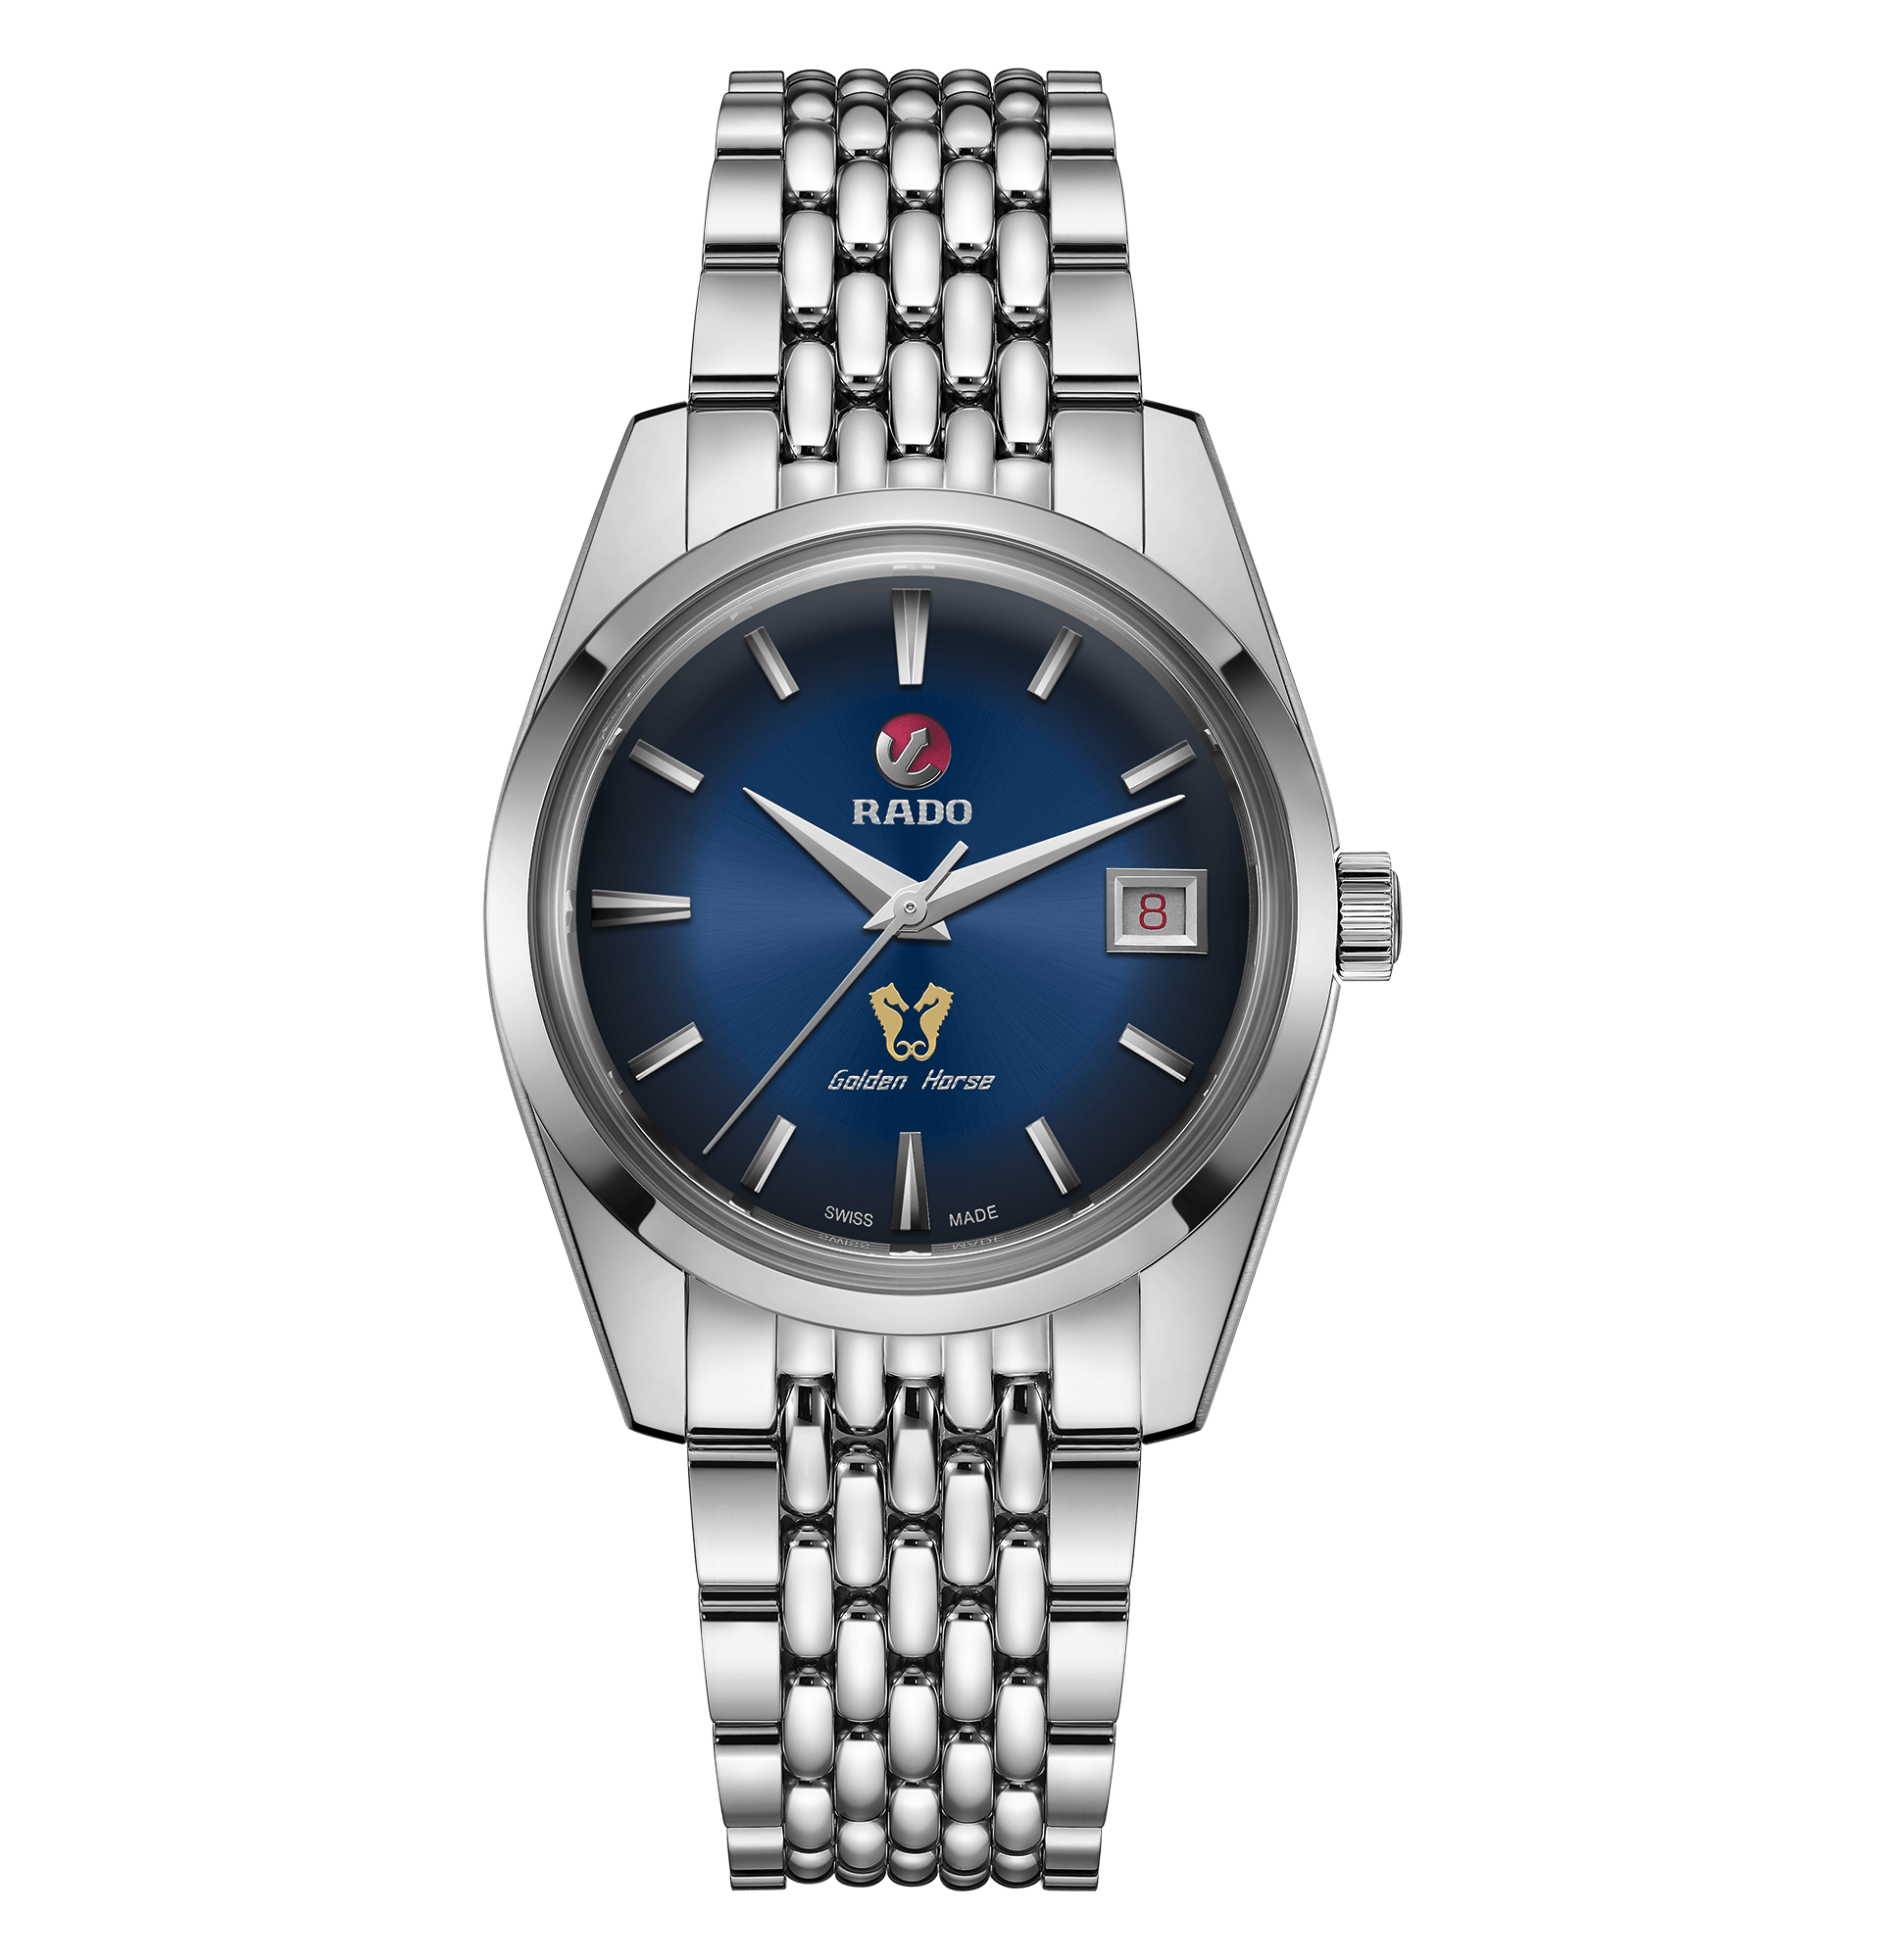 RADO Golden Horse 1957 Limited Edition Blue Dial Stainless Steel Unisex Watch R33930203